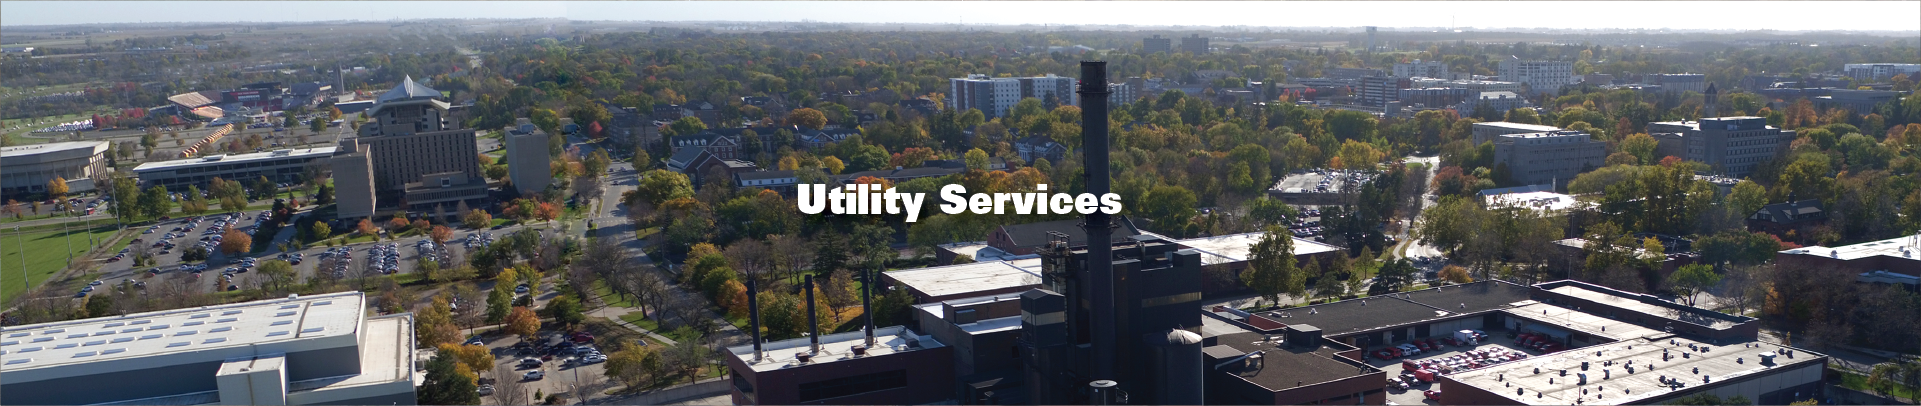 Utility Services